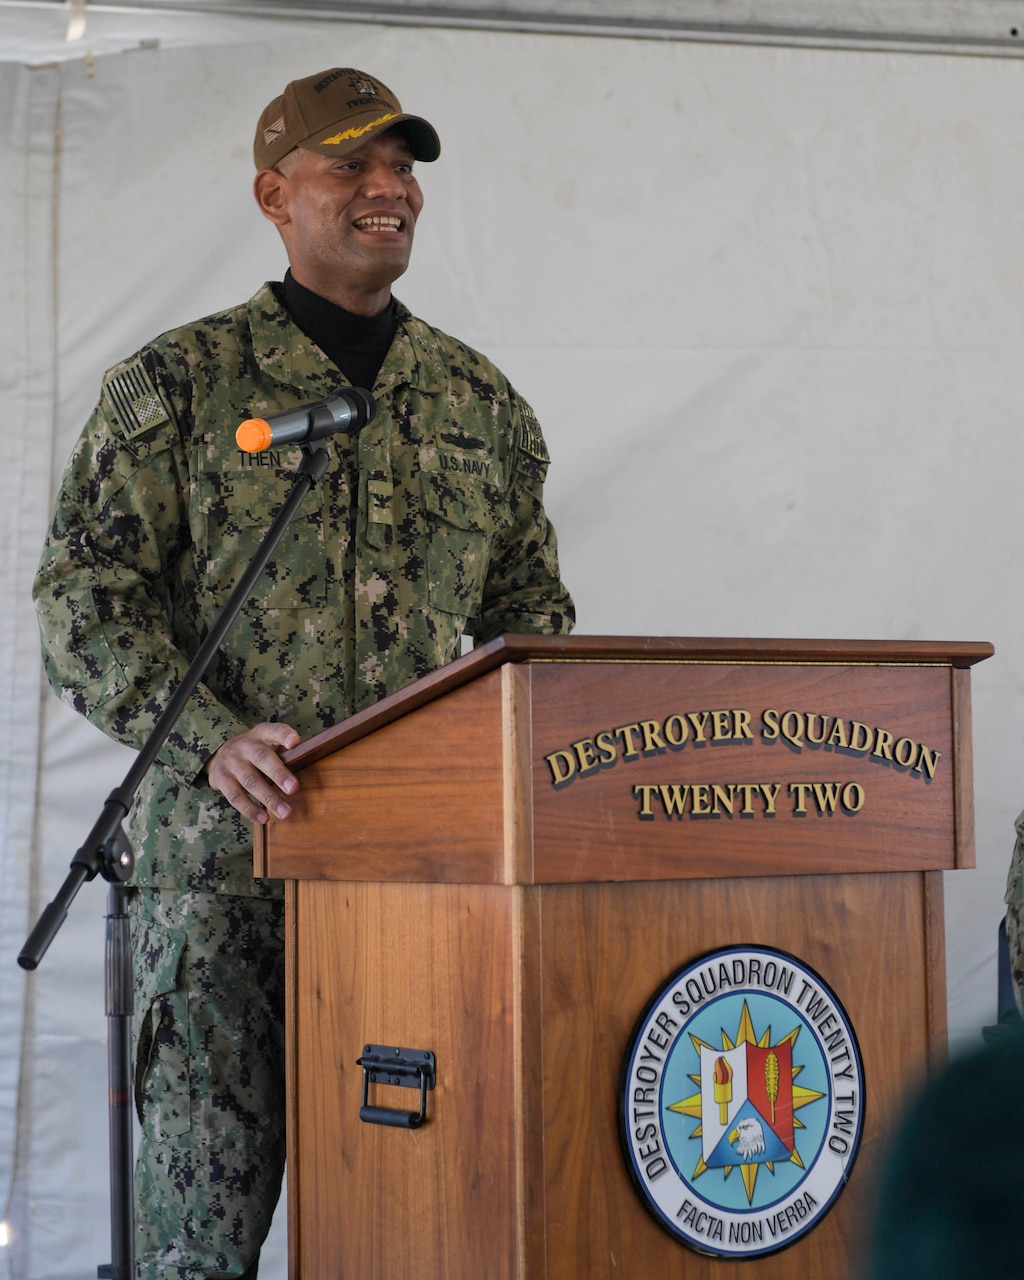 Capt. Milciades "Tony" Then, commodore, Destroyer Squadron (DESRON) 22, speaks during the DESRON 22 change of command ceremony on board the Arleigh Burke-class guided-missile destroyer USS Mitscher (DDG 57). DESRON 22 consists of guided-missile destroyers, including Mitscher, USS Laboon (DDG 58), USS Ramage (DDG 61), and USS Mahan (DDG 72). Established in March 1943, DESRON 22 is one of the oldest destroyer squadrons in the U.S. Navy. (U.S. Navy photo by Mass Communication Specialist 1st Class Jacob Milham/Released)